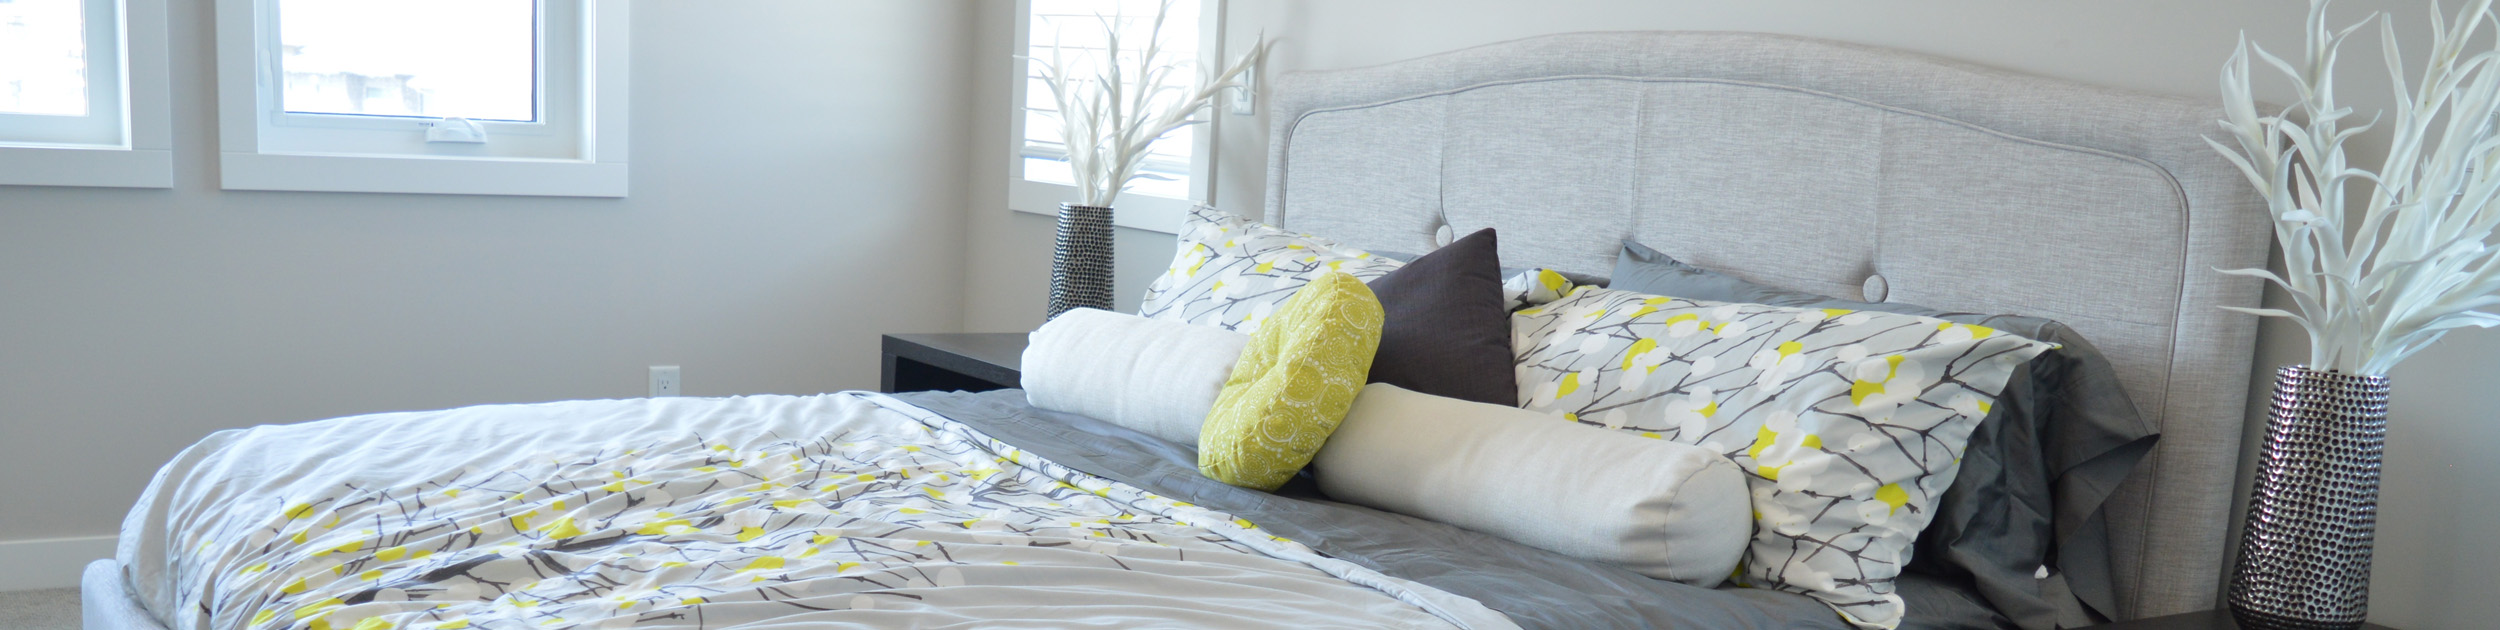 bedroom with gray white and yellow beddeing